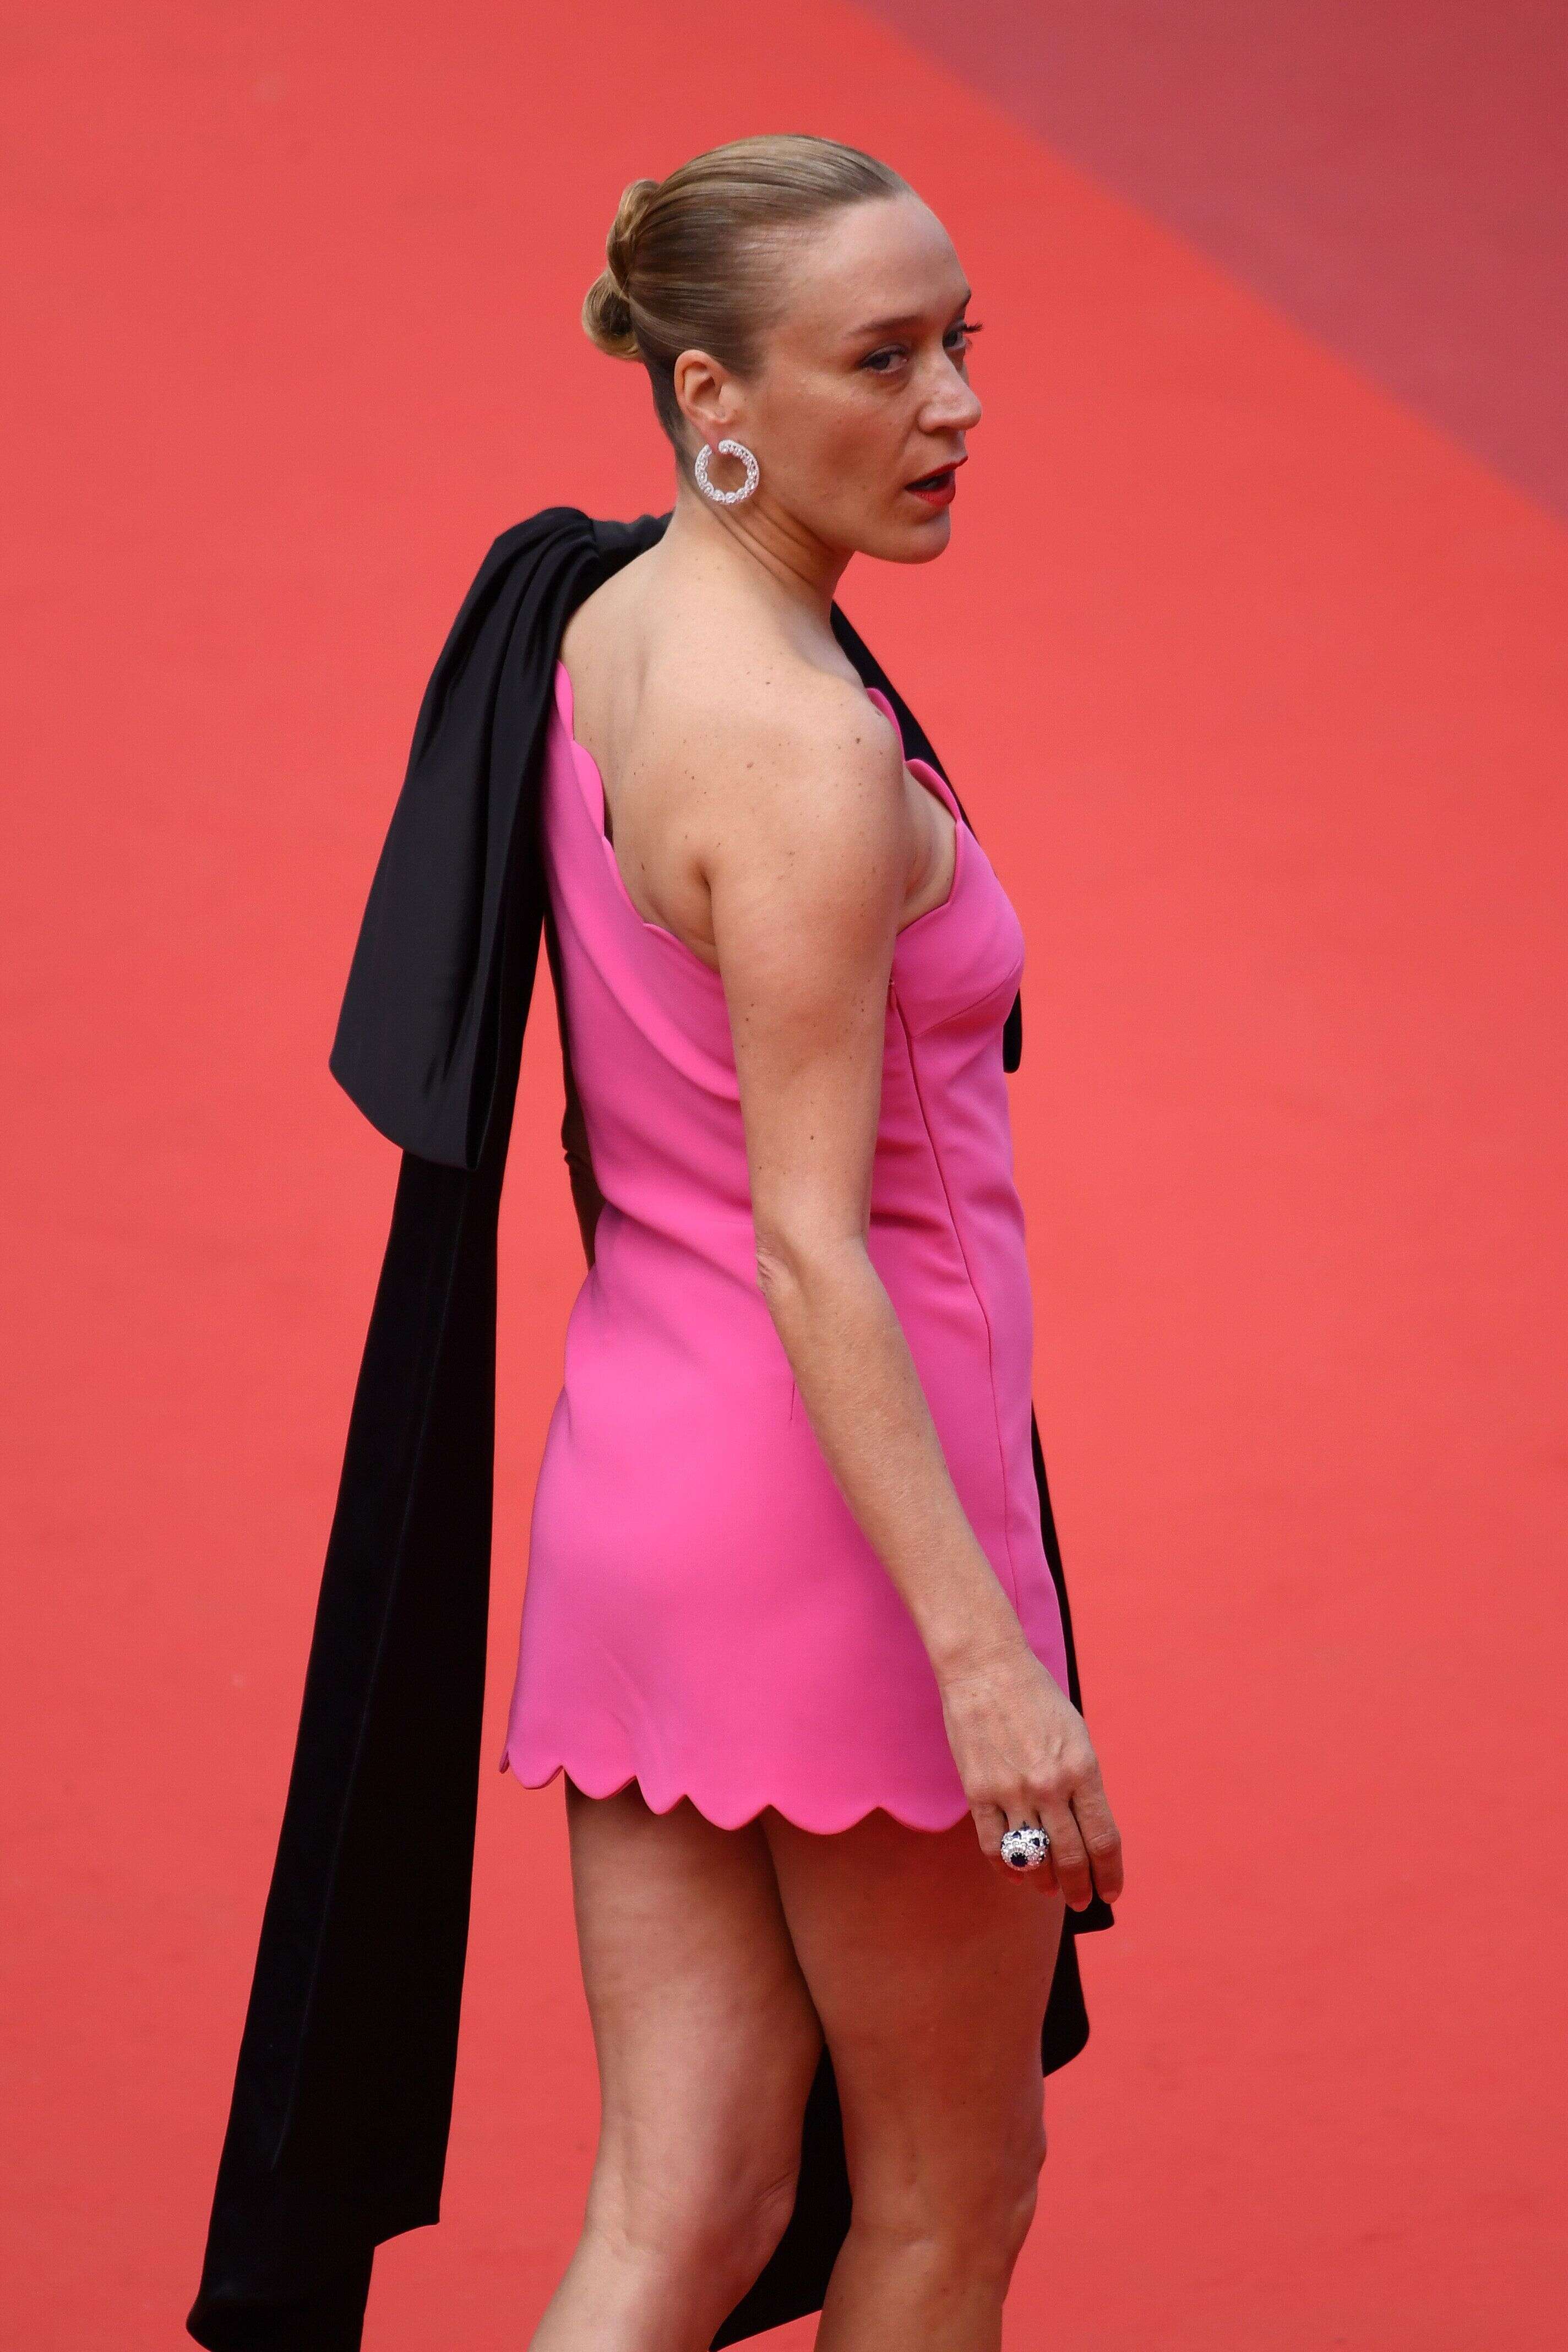 CANNES, FRANCE - MAY 21: Chloe Sevigny attends the screening of 